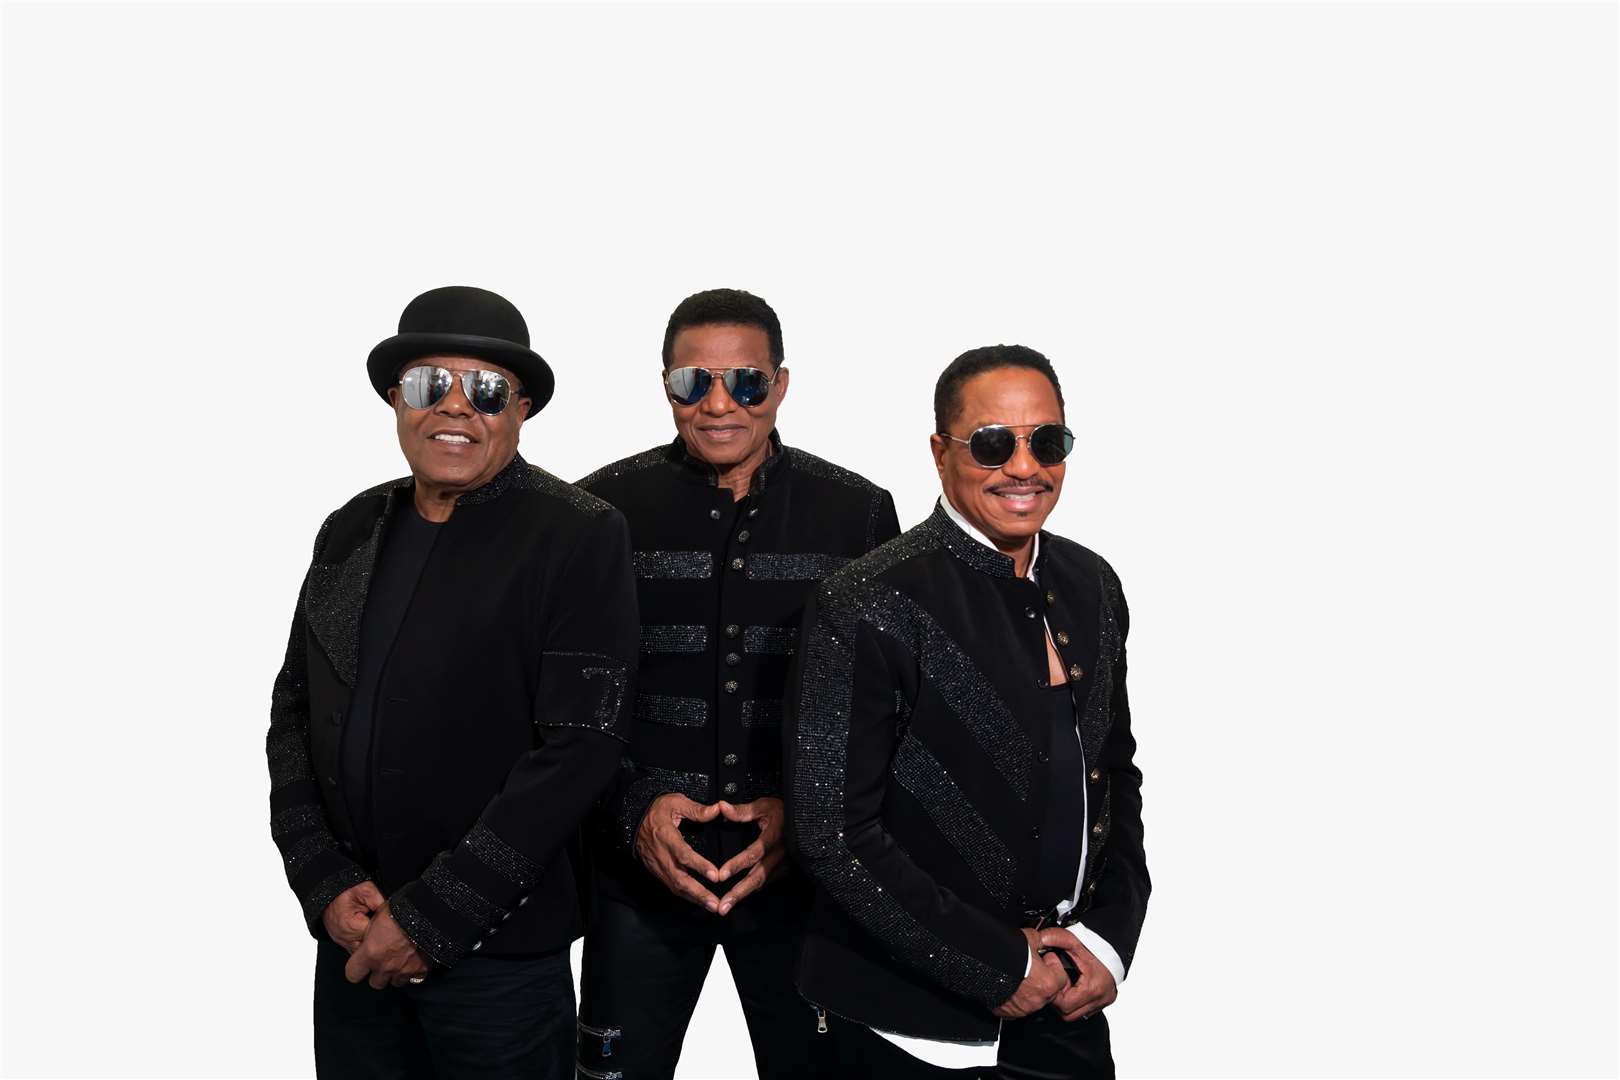 Jackie, Tito and Marlon Jackson will be performing at the event.